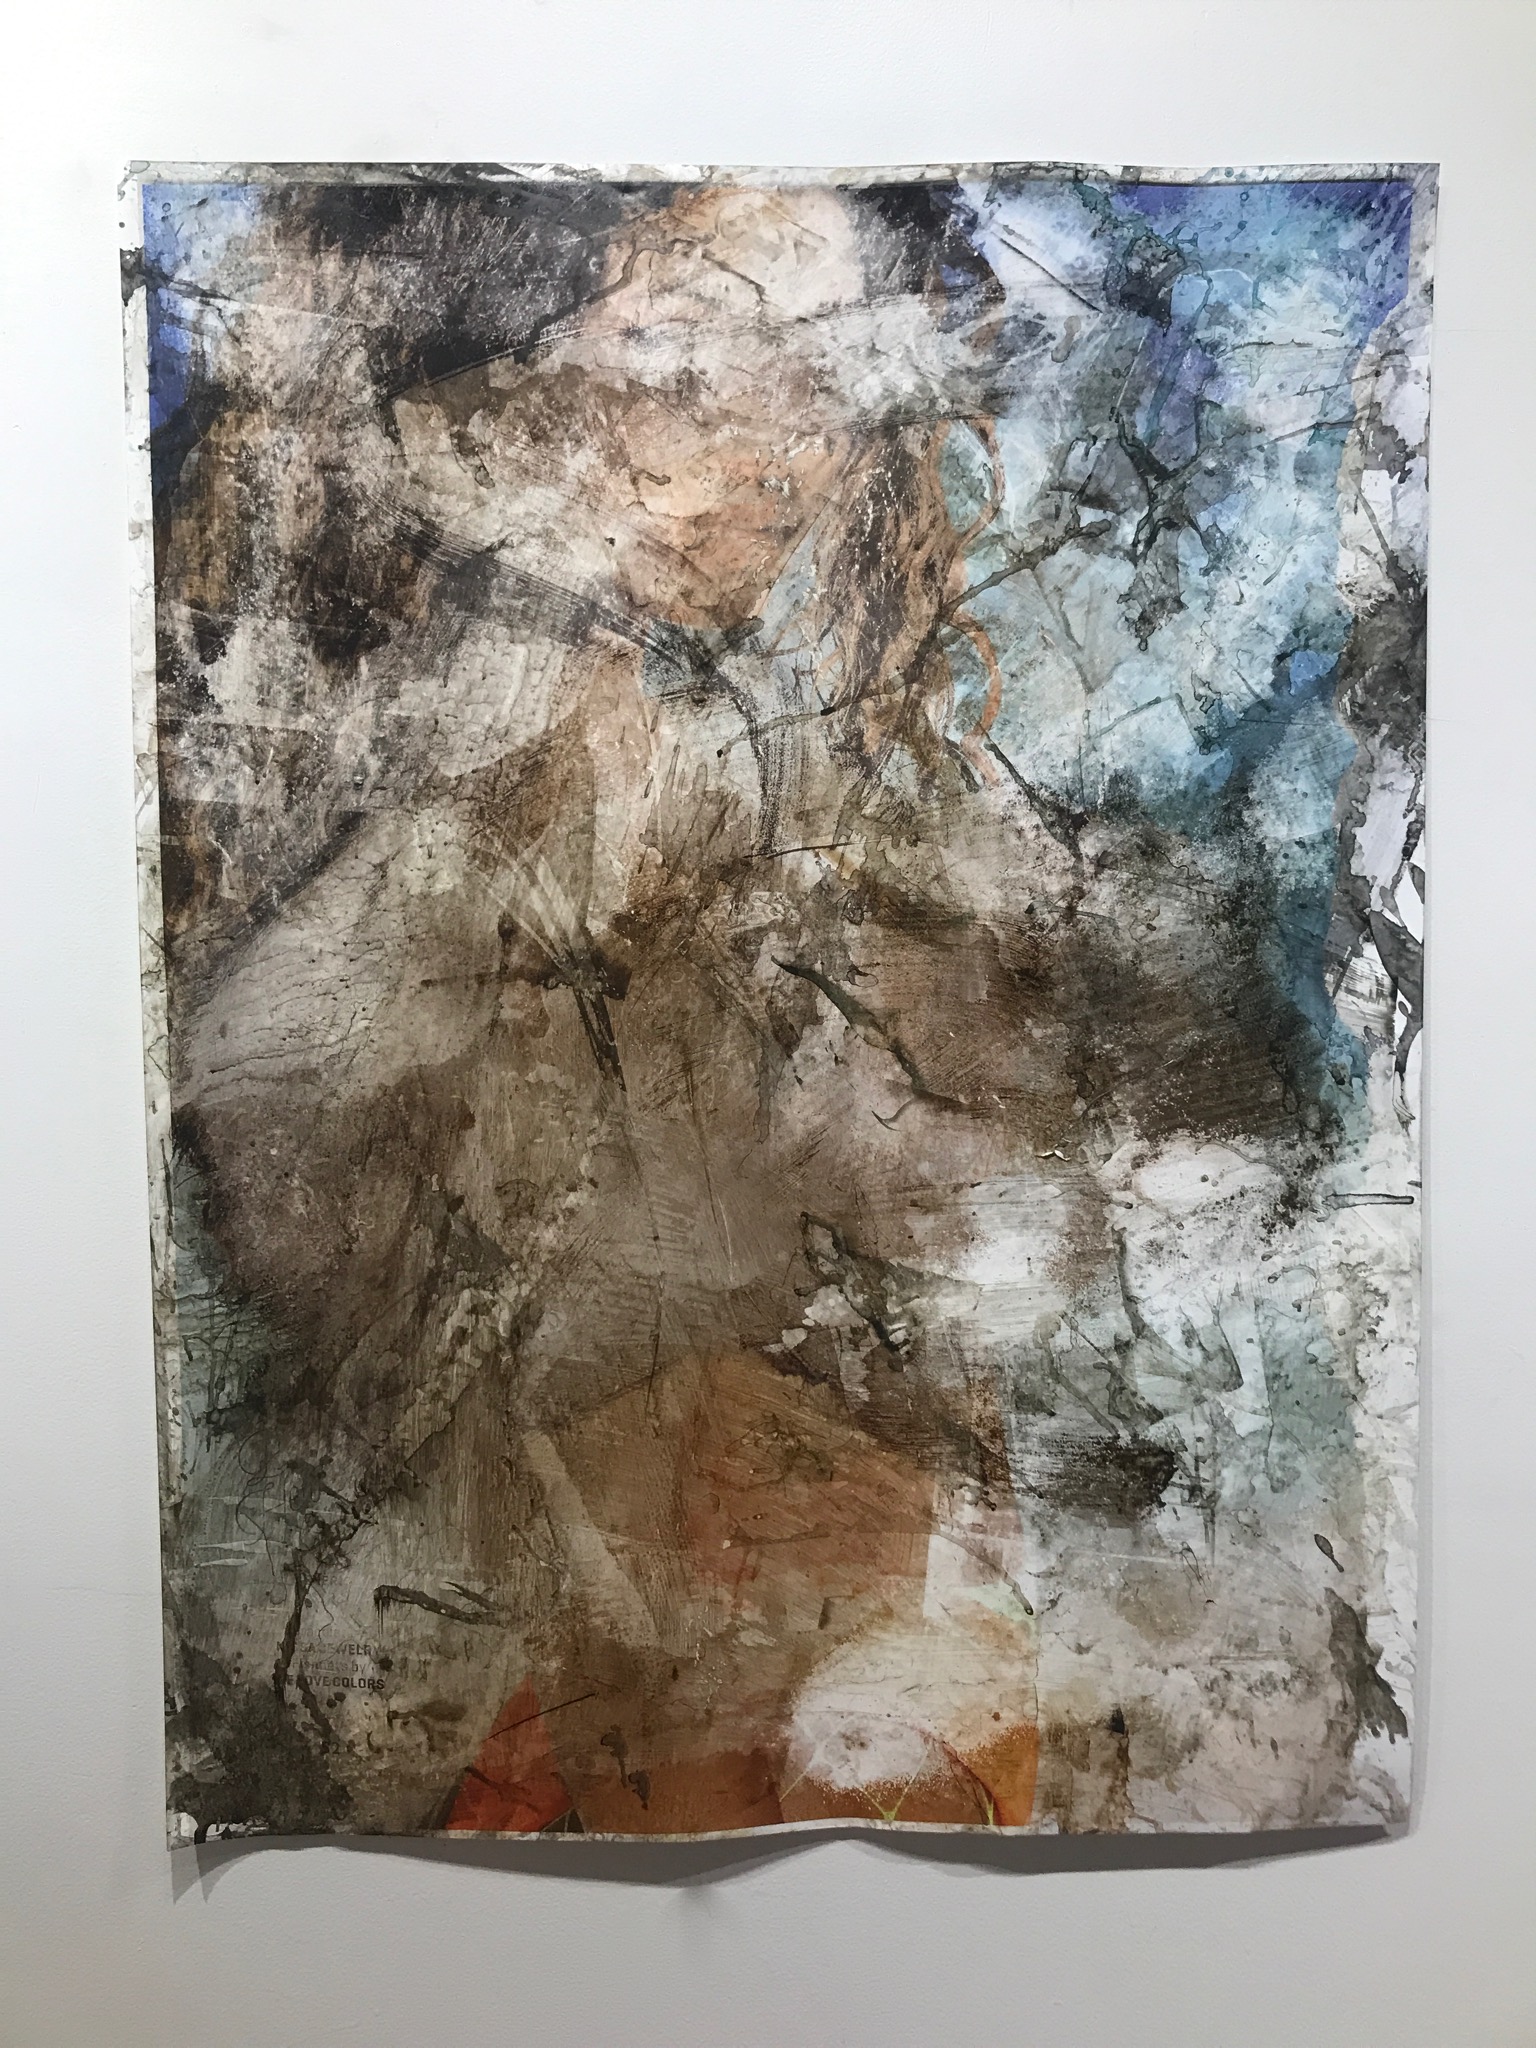   Fishnets   2018  47 x 36 in.  Citra solv on magazine, nail polish remover, pine sol, bleach, and window cleaner on photo paper 